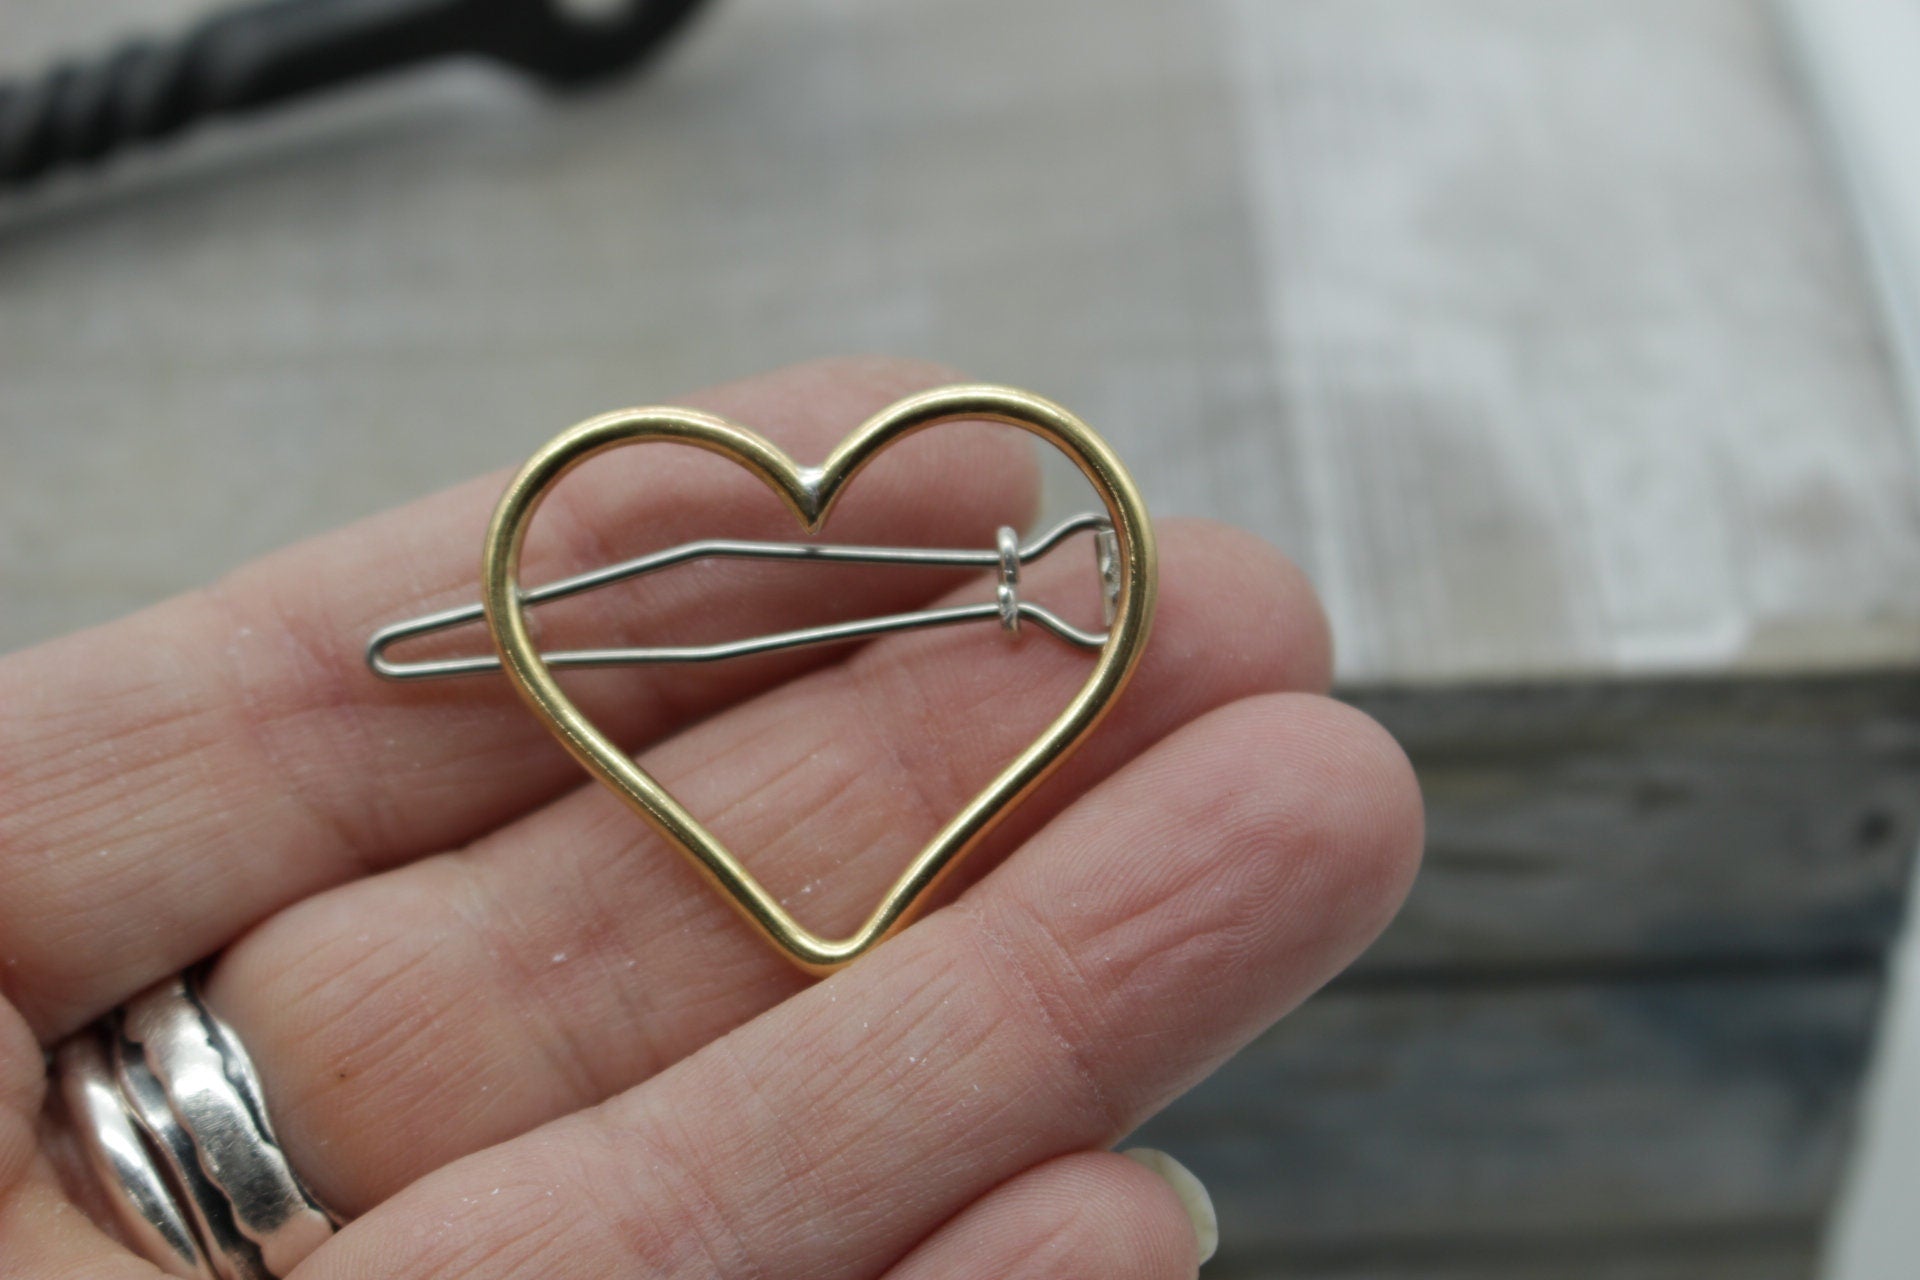 Small gold heart barrette - Heart Barrette - Gift for Her - Hair Accessory - short hair barrette - Hair Jewelry